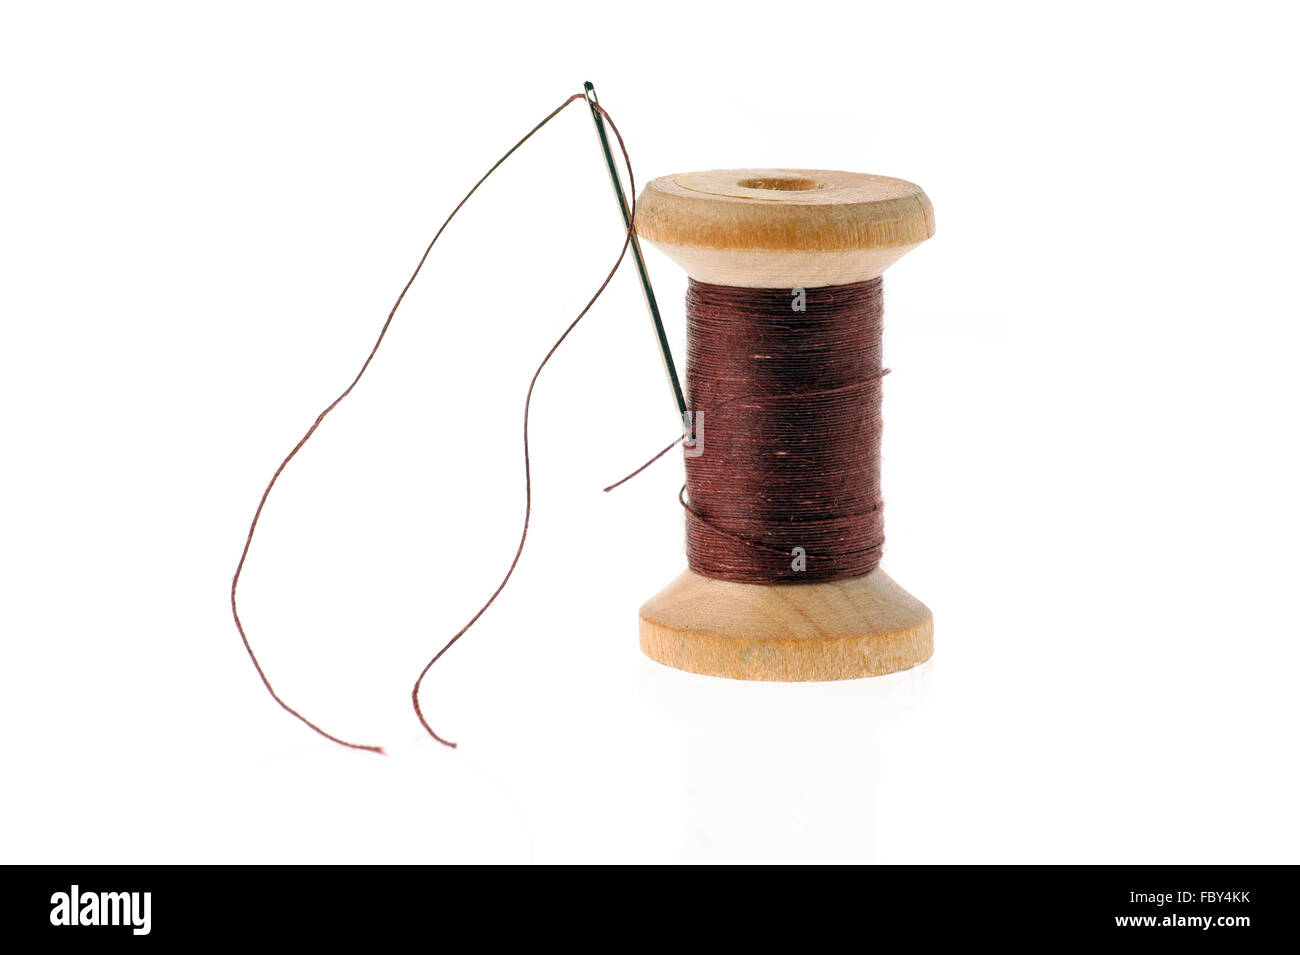 Black Thread on an Old Wooden Spool and Sewing Needle Stock